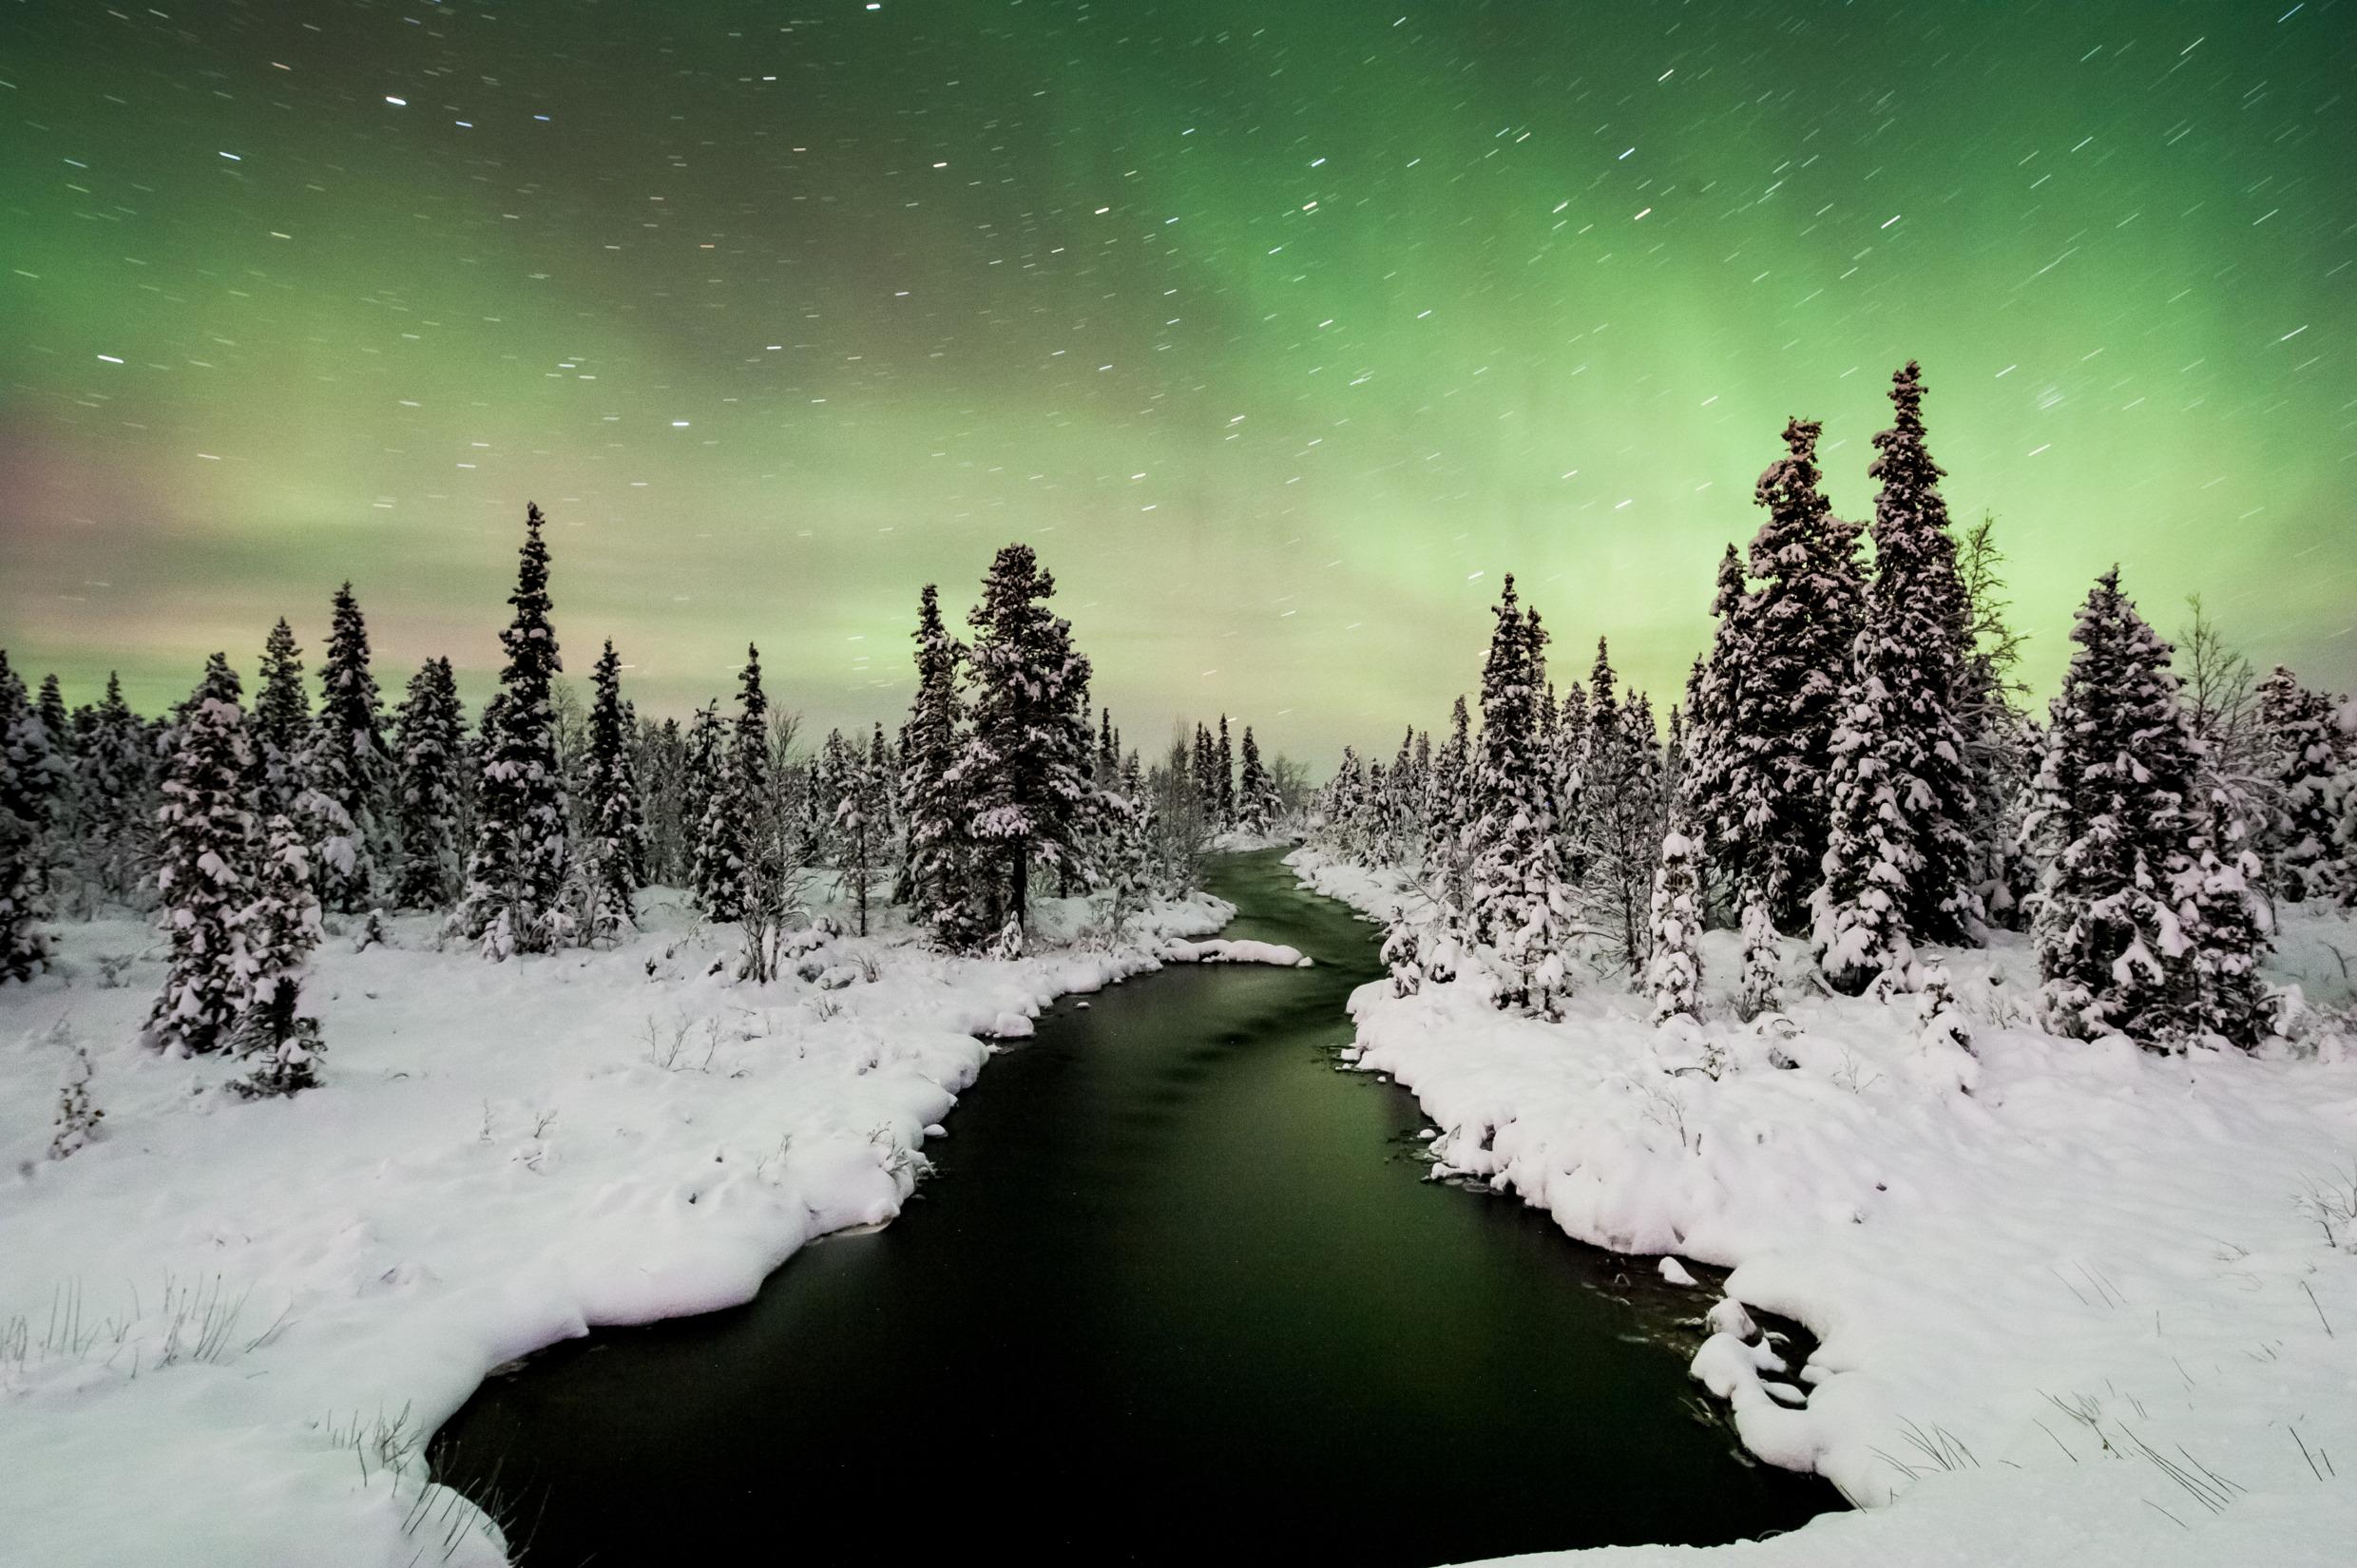 The Northern Lights seen above a winter forest landscape with a stream in the middle.